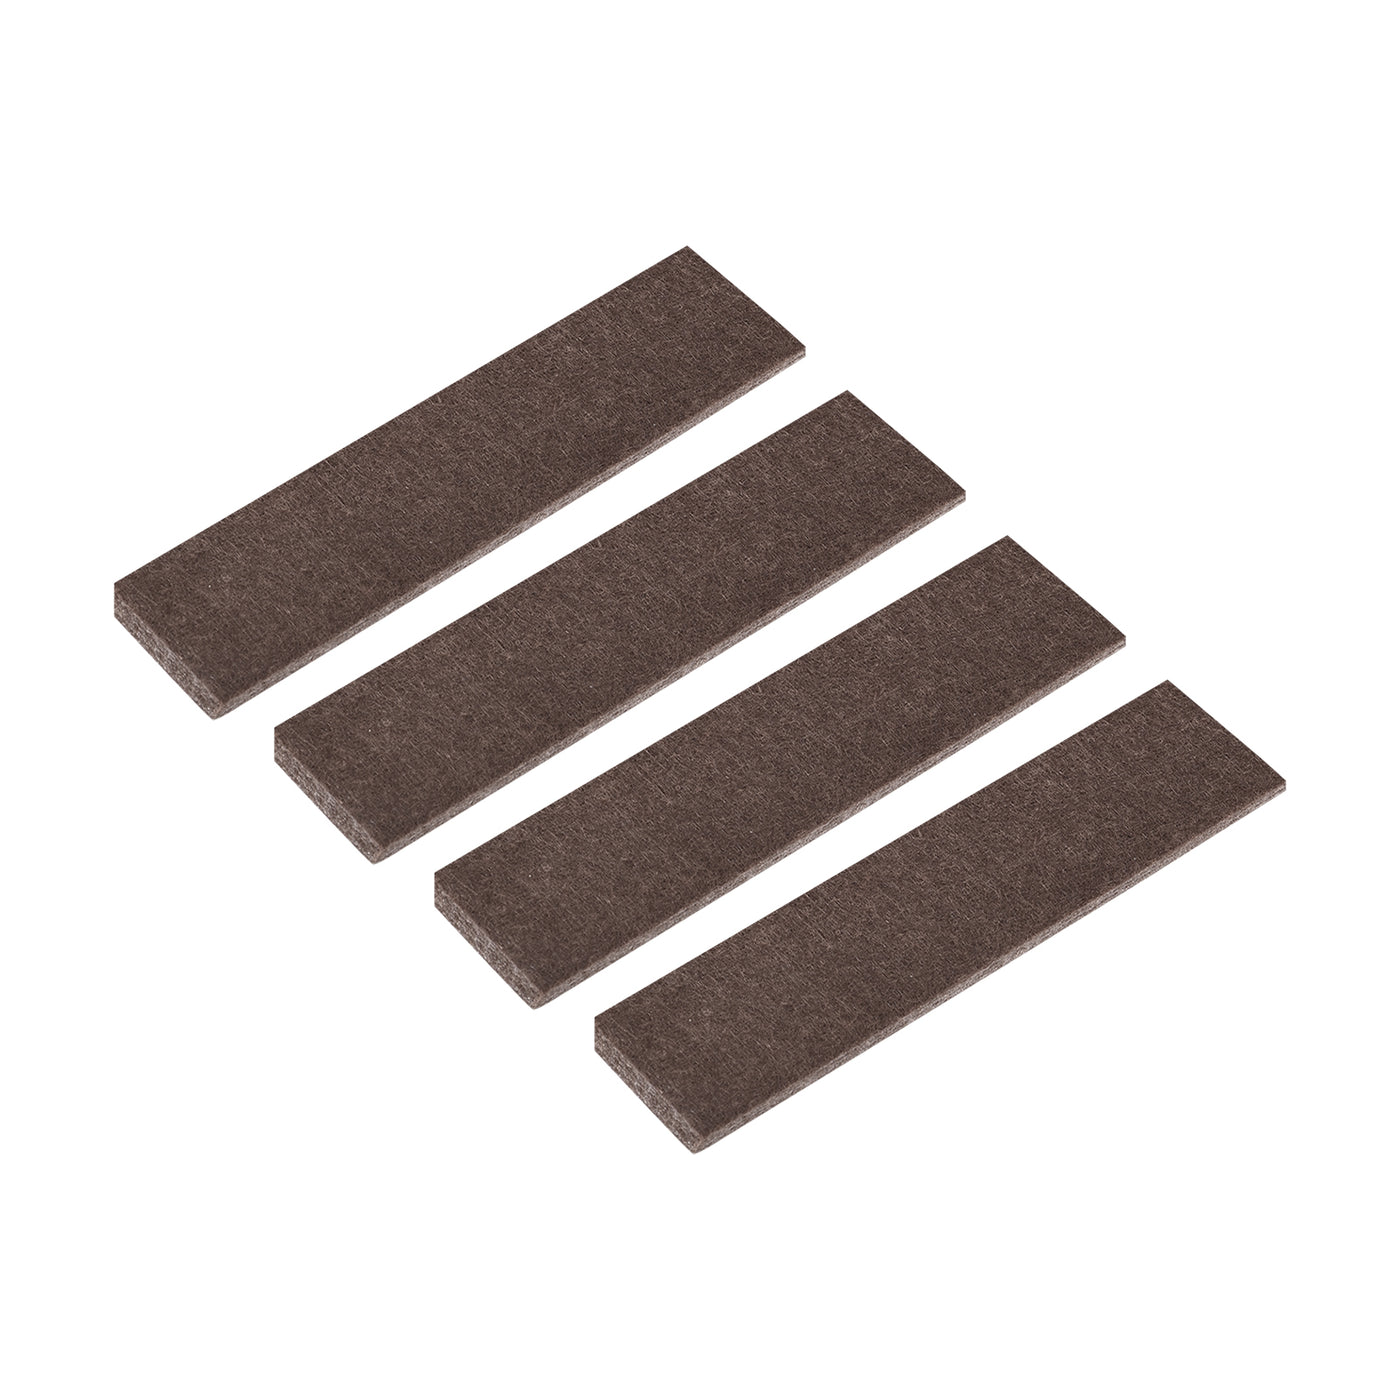 uxcell Uxcell Felt Furniture Pads, 100mm x 25mm Self Adhesive Square Floor Protectors for Furniture Legs Hardwood Floor, Brown 24Pcs